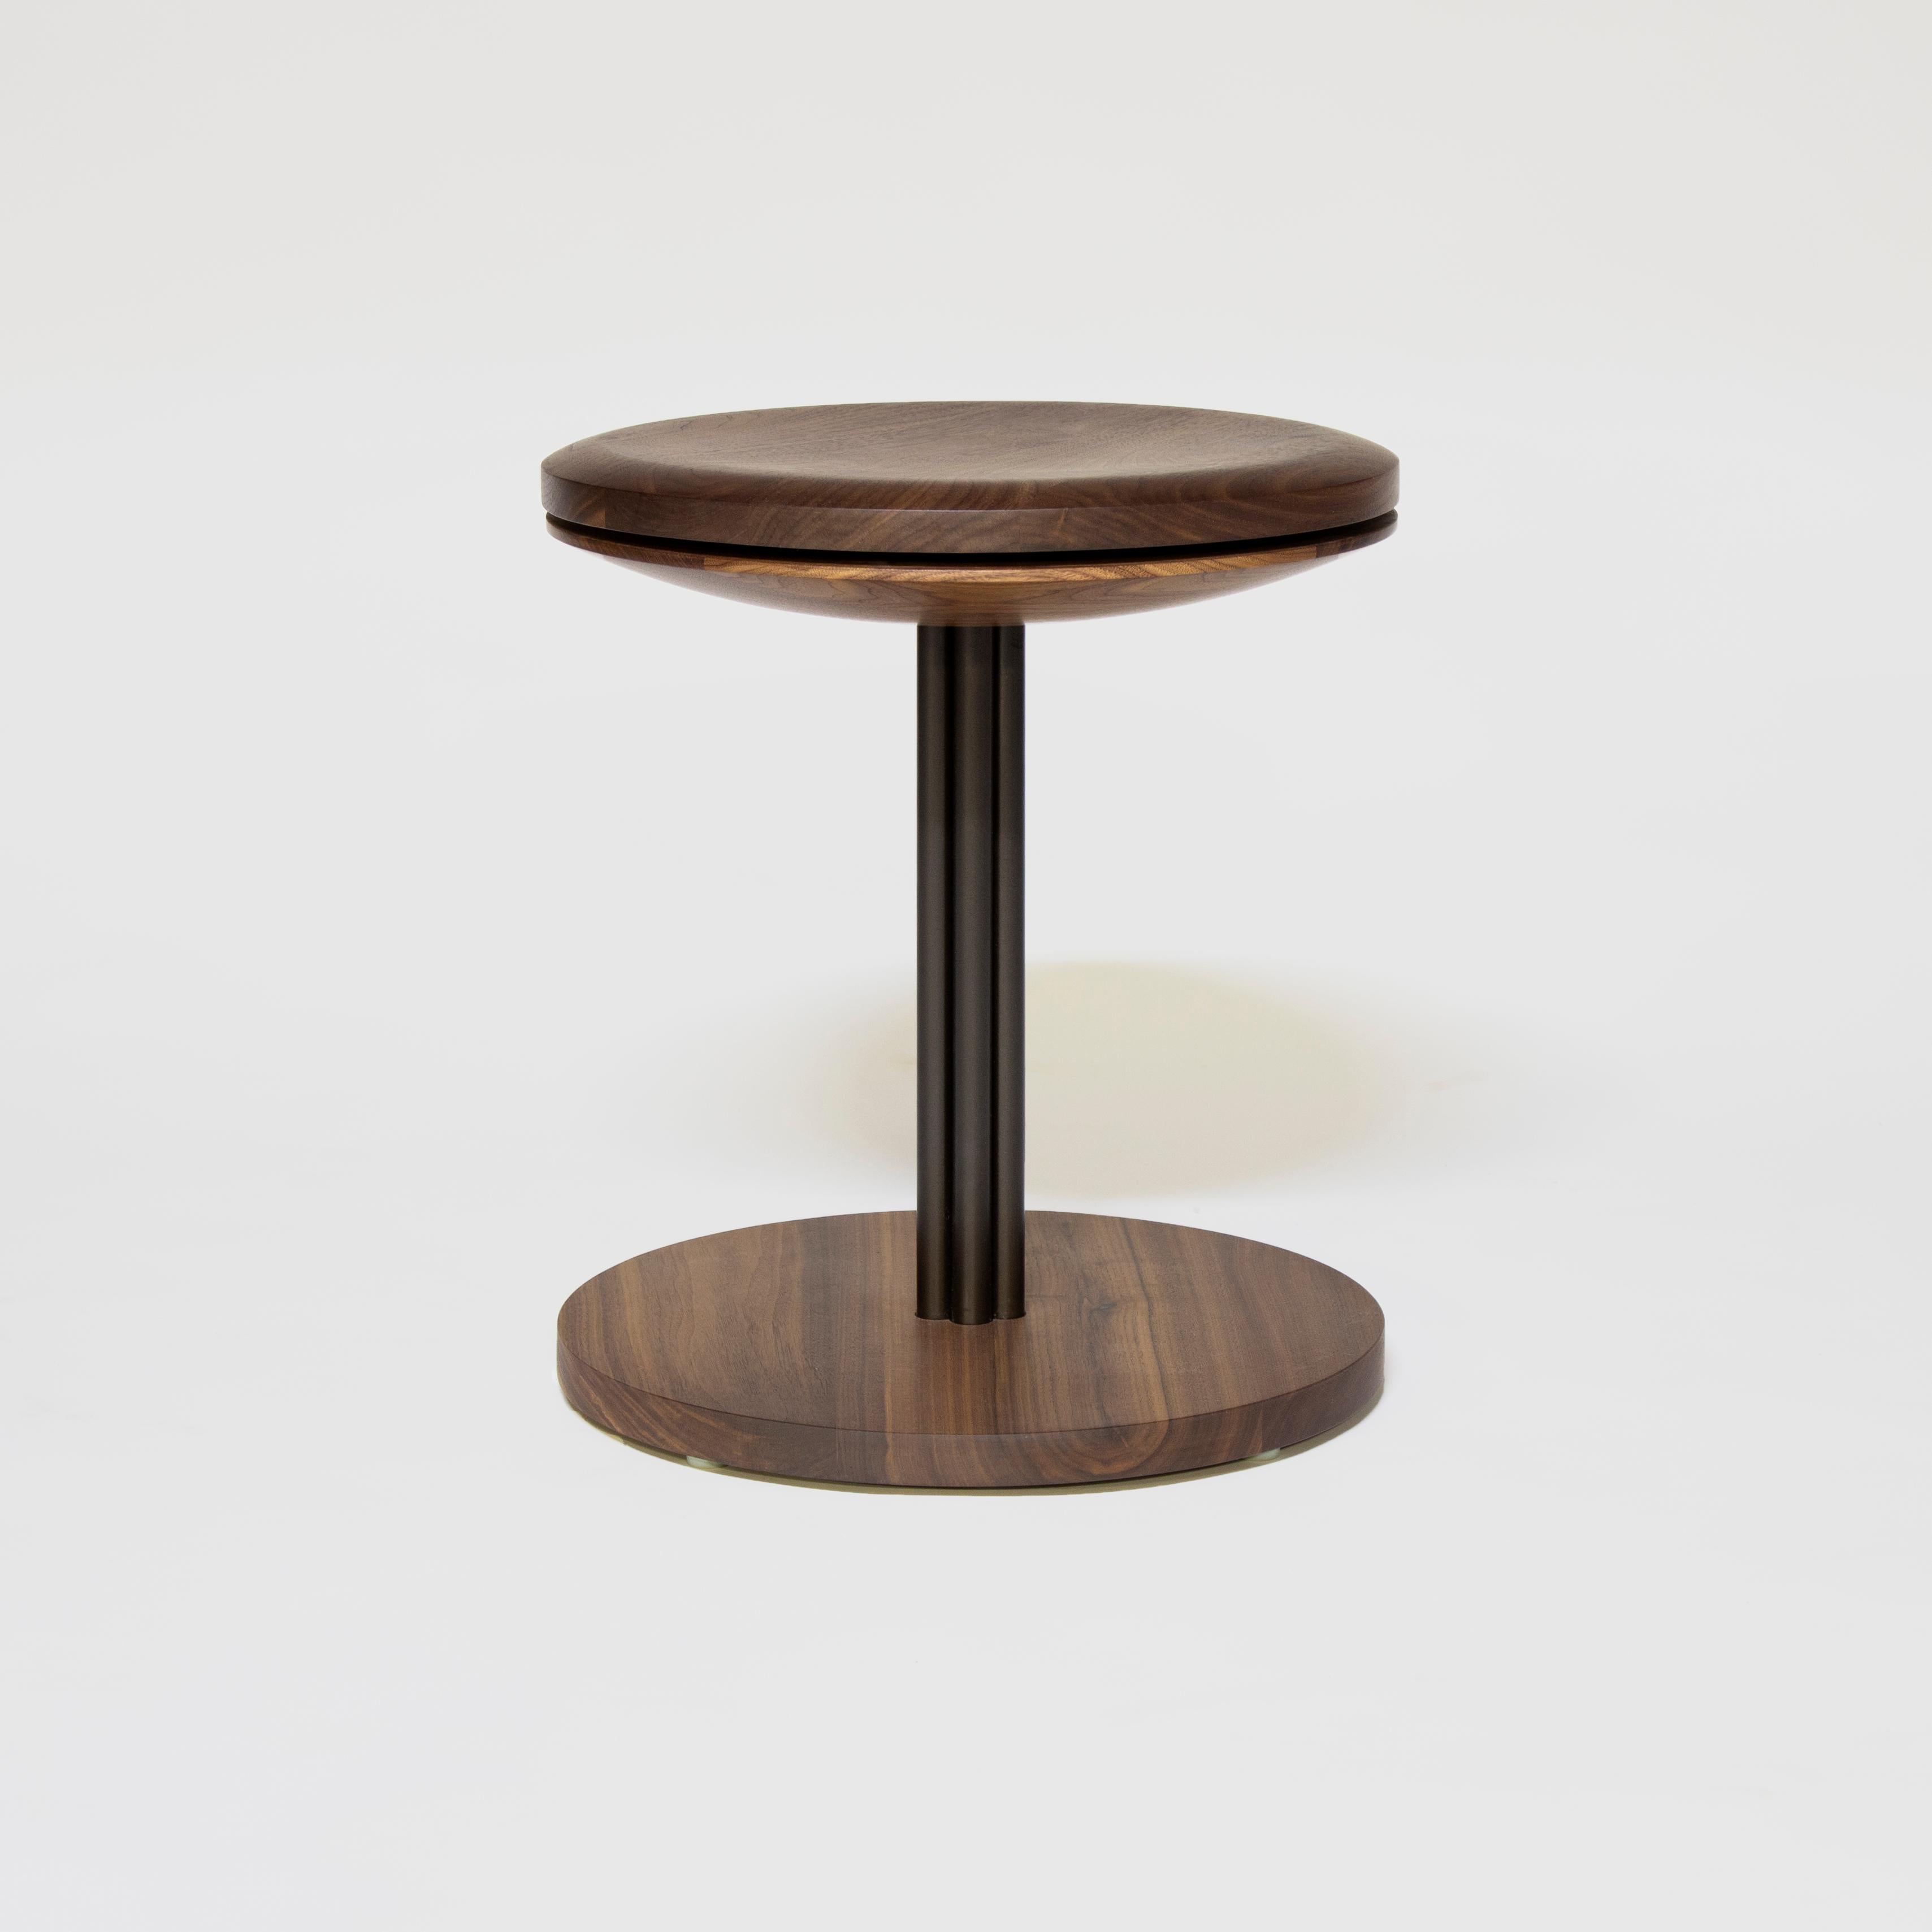 Inez stool
by Crump and Kwash 

Carved solid wood seat and base / hand rubbed zero VOC oil finish / solid steel construction / 360 degree rotating seat top. 

Measures: Height 18in 
Diameter 16in. 

Wood options: Maple, blackened oak, walnut, white